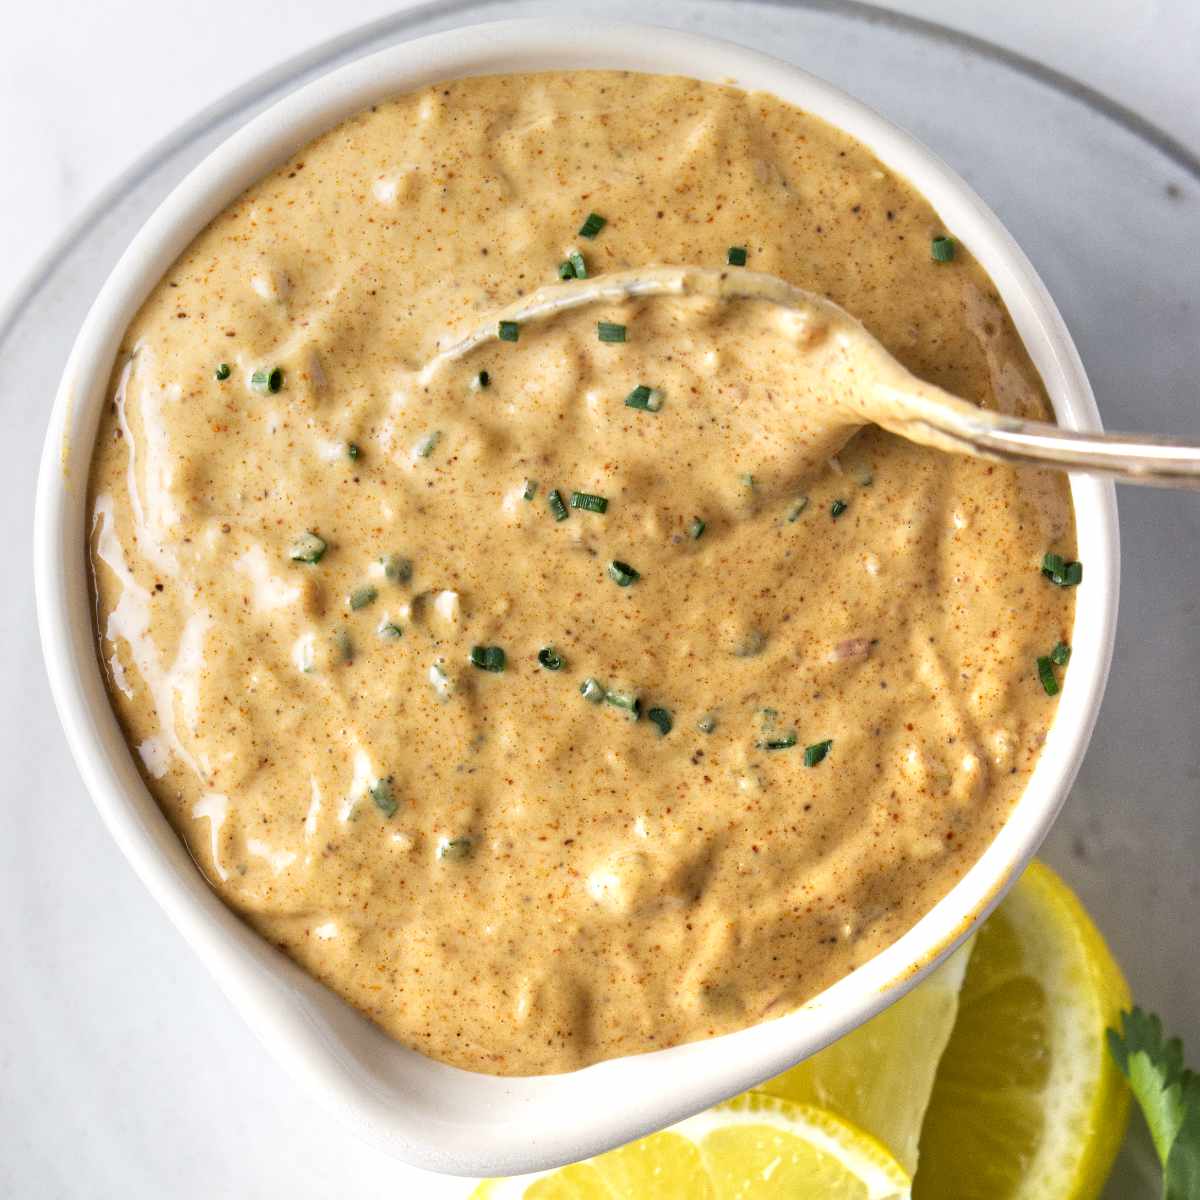 Creamy remoulade sauce in a dish with a spoon.